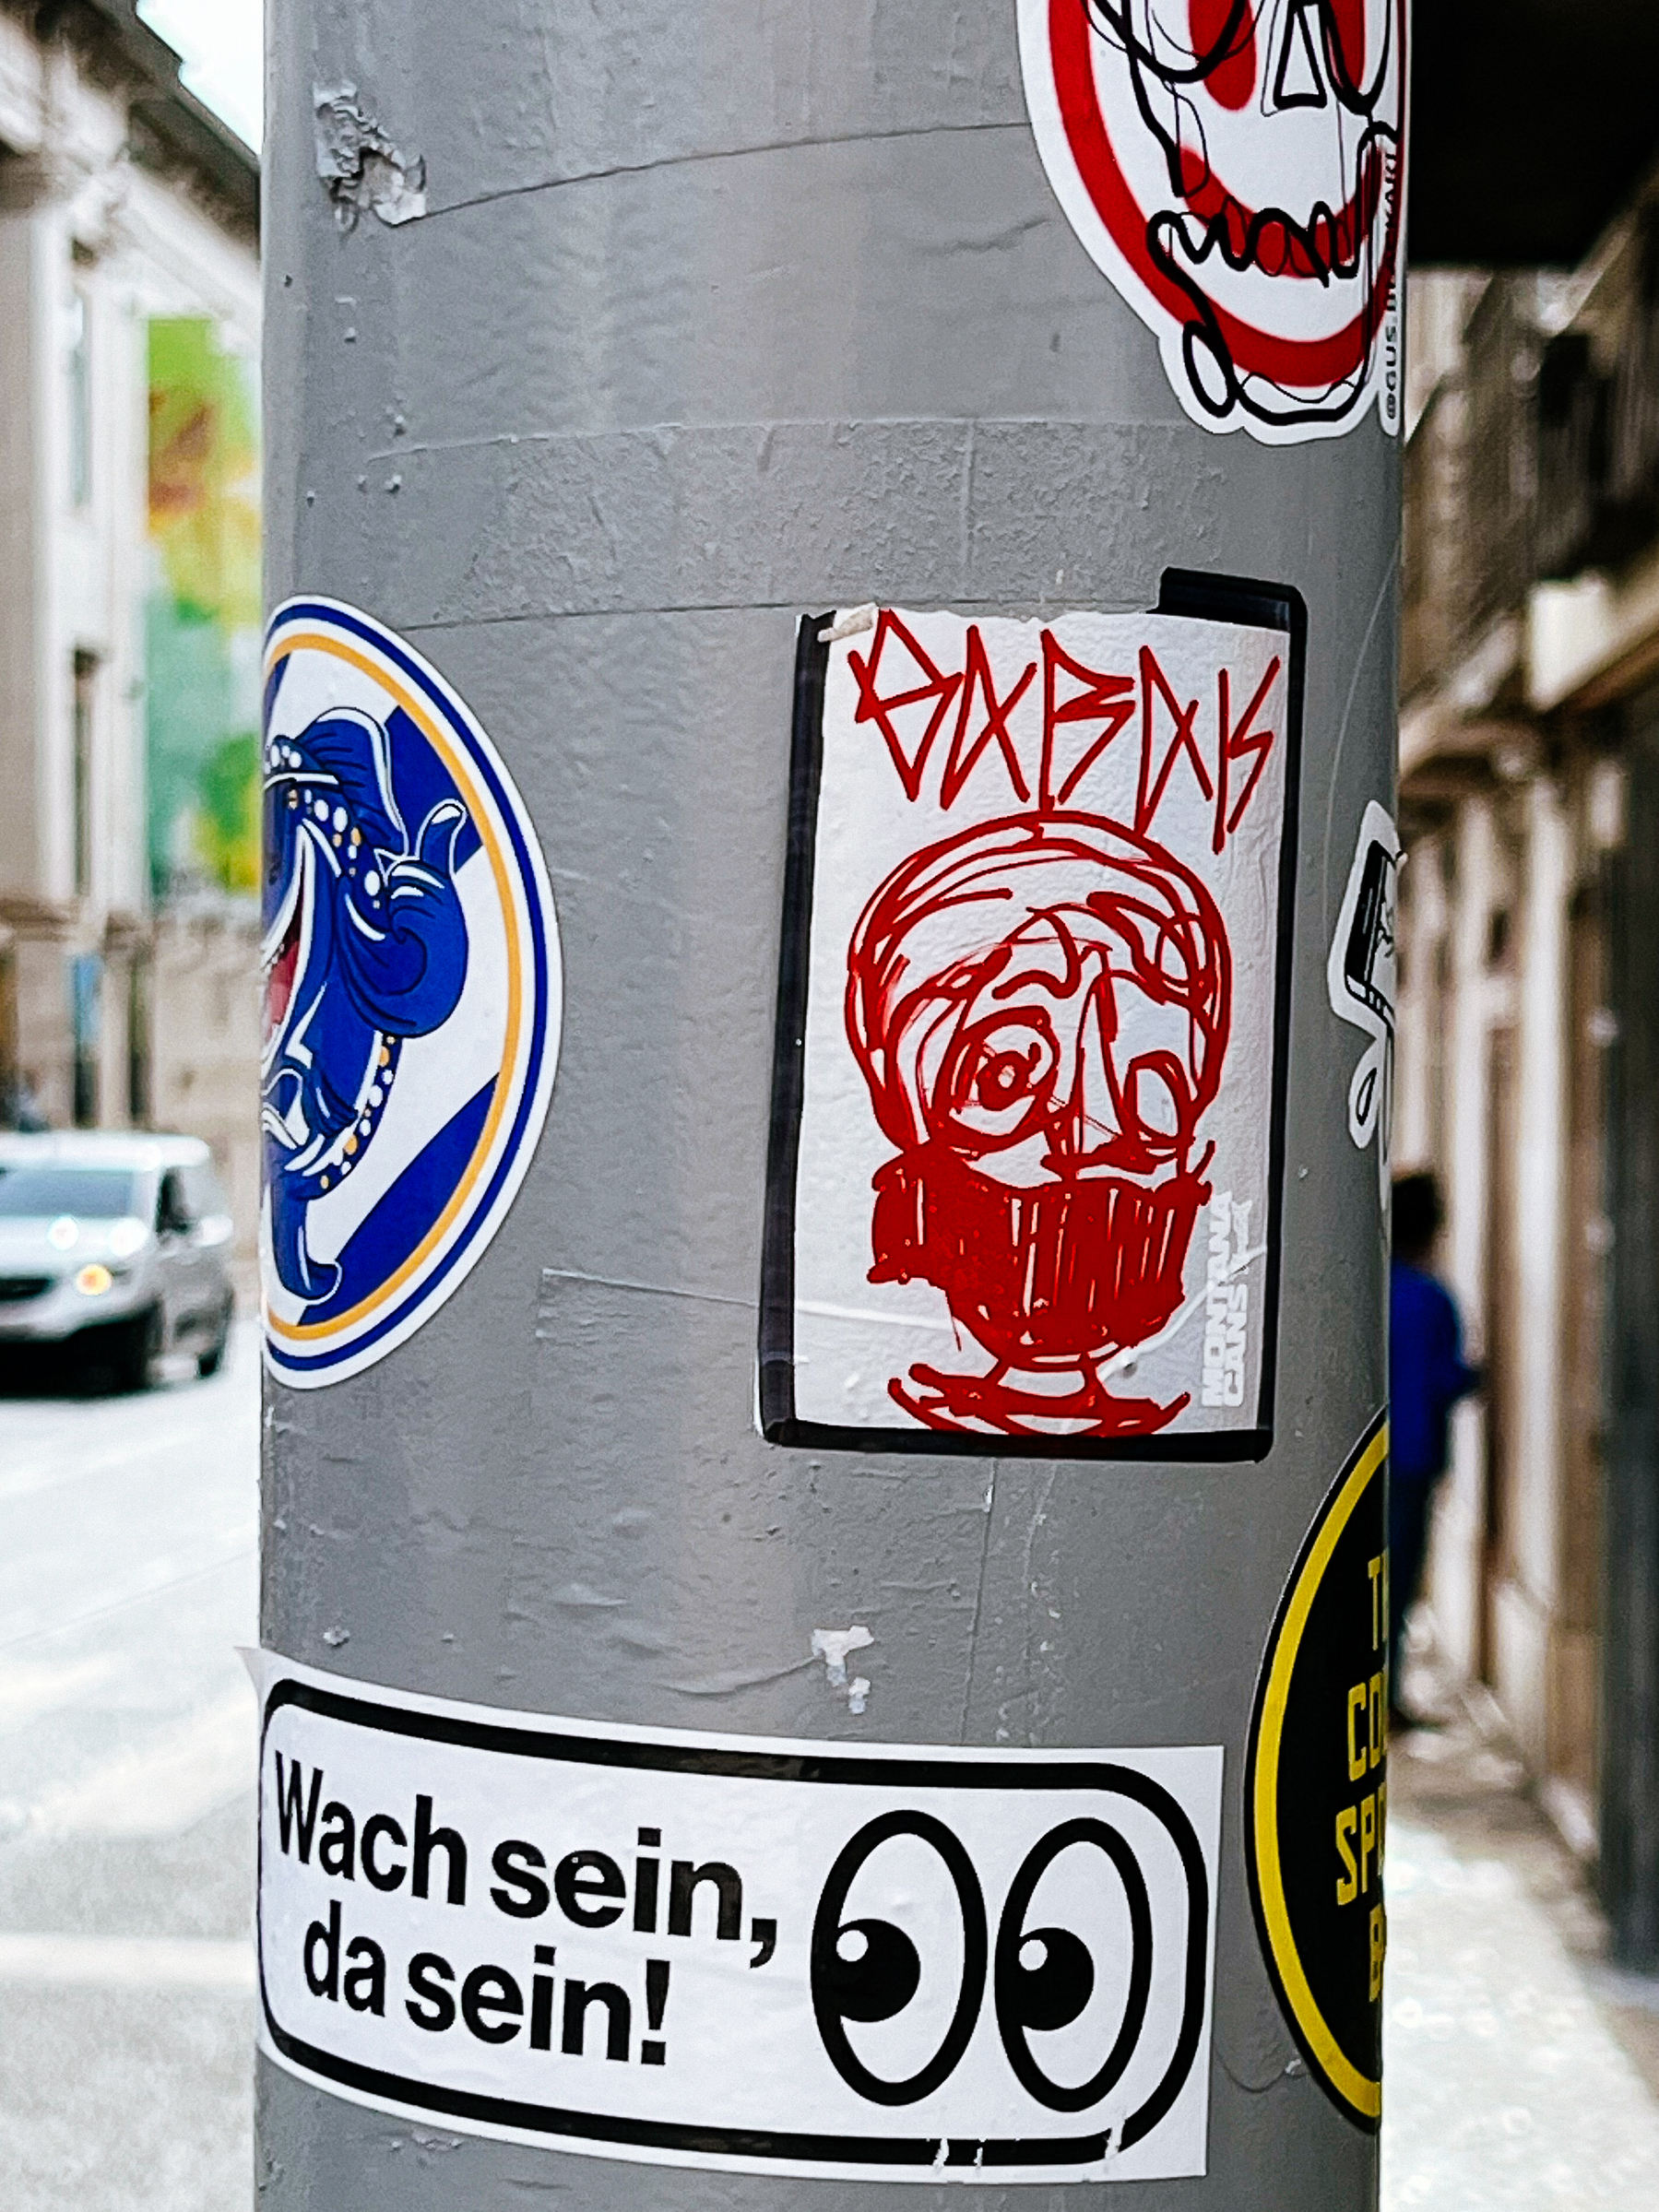 Stickers on a utilities pole. One has a crudely drawn face, and another a pair of eyes, emoji like, and “wach sein, da sein”. 